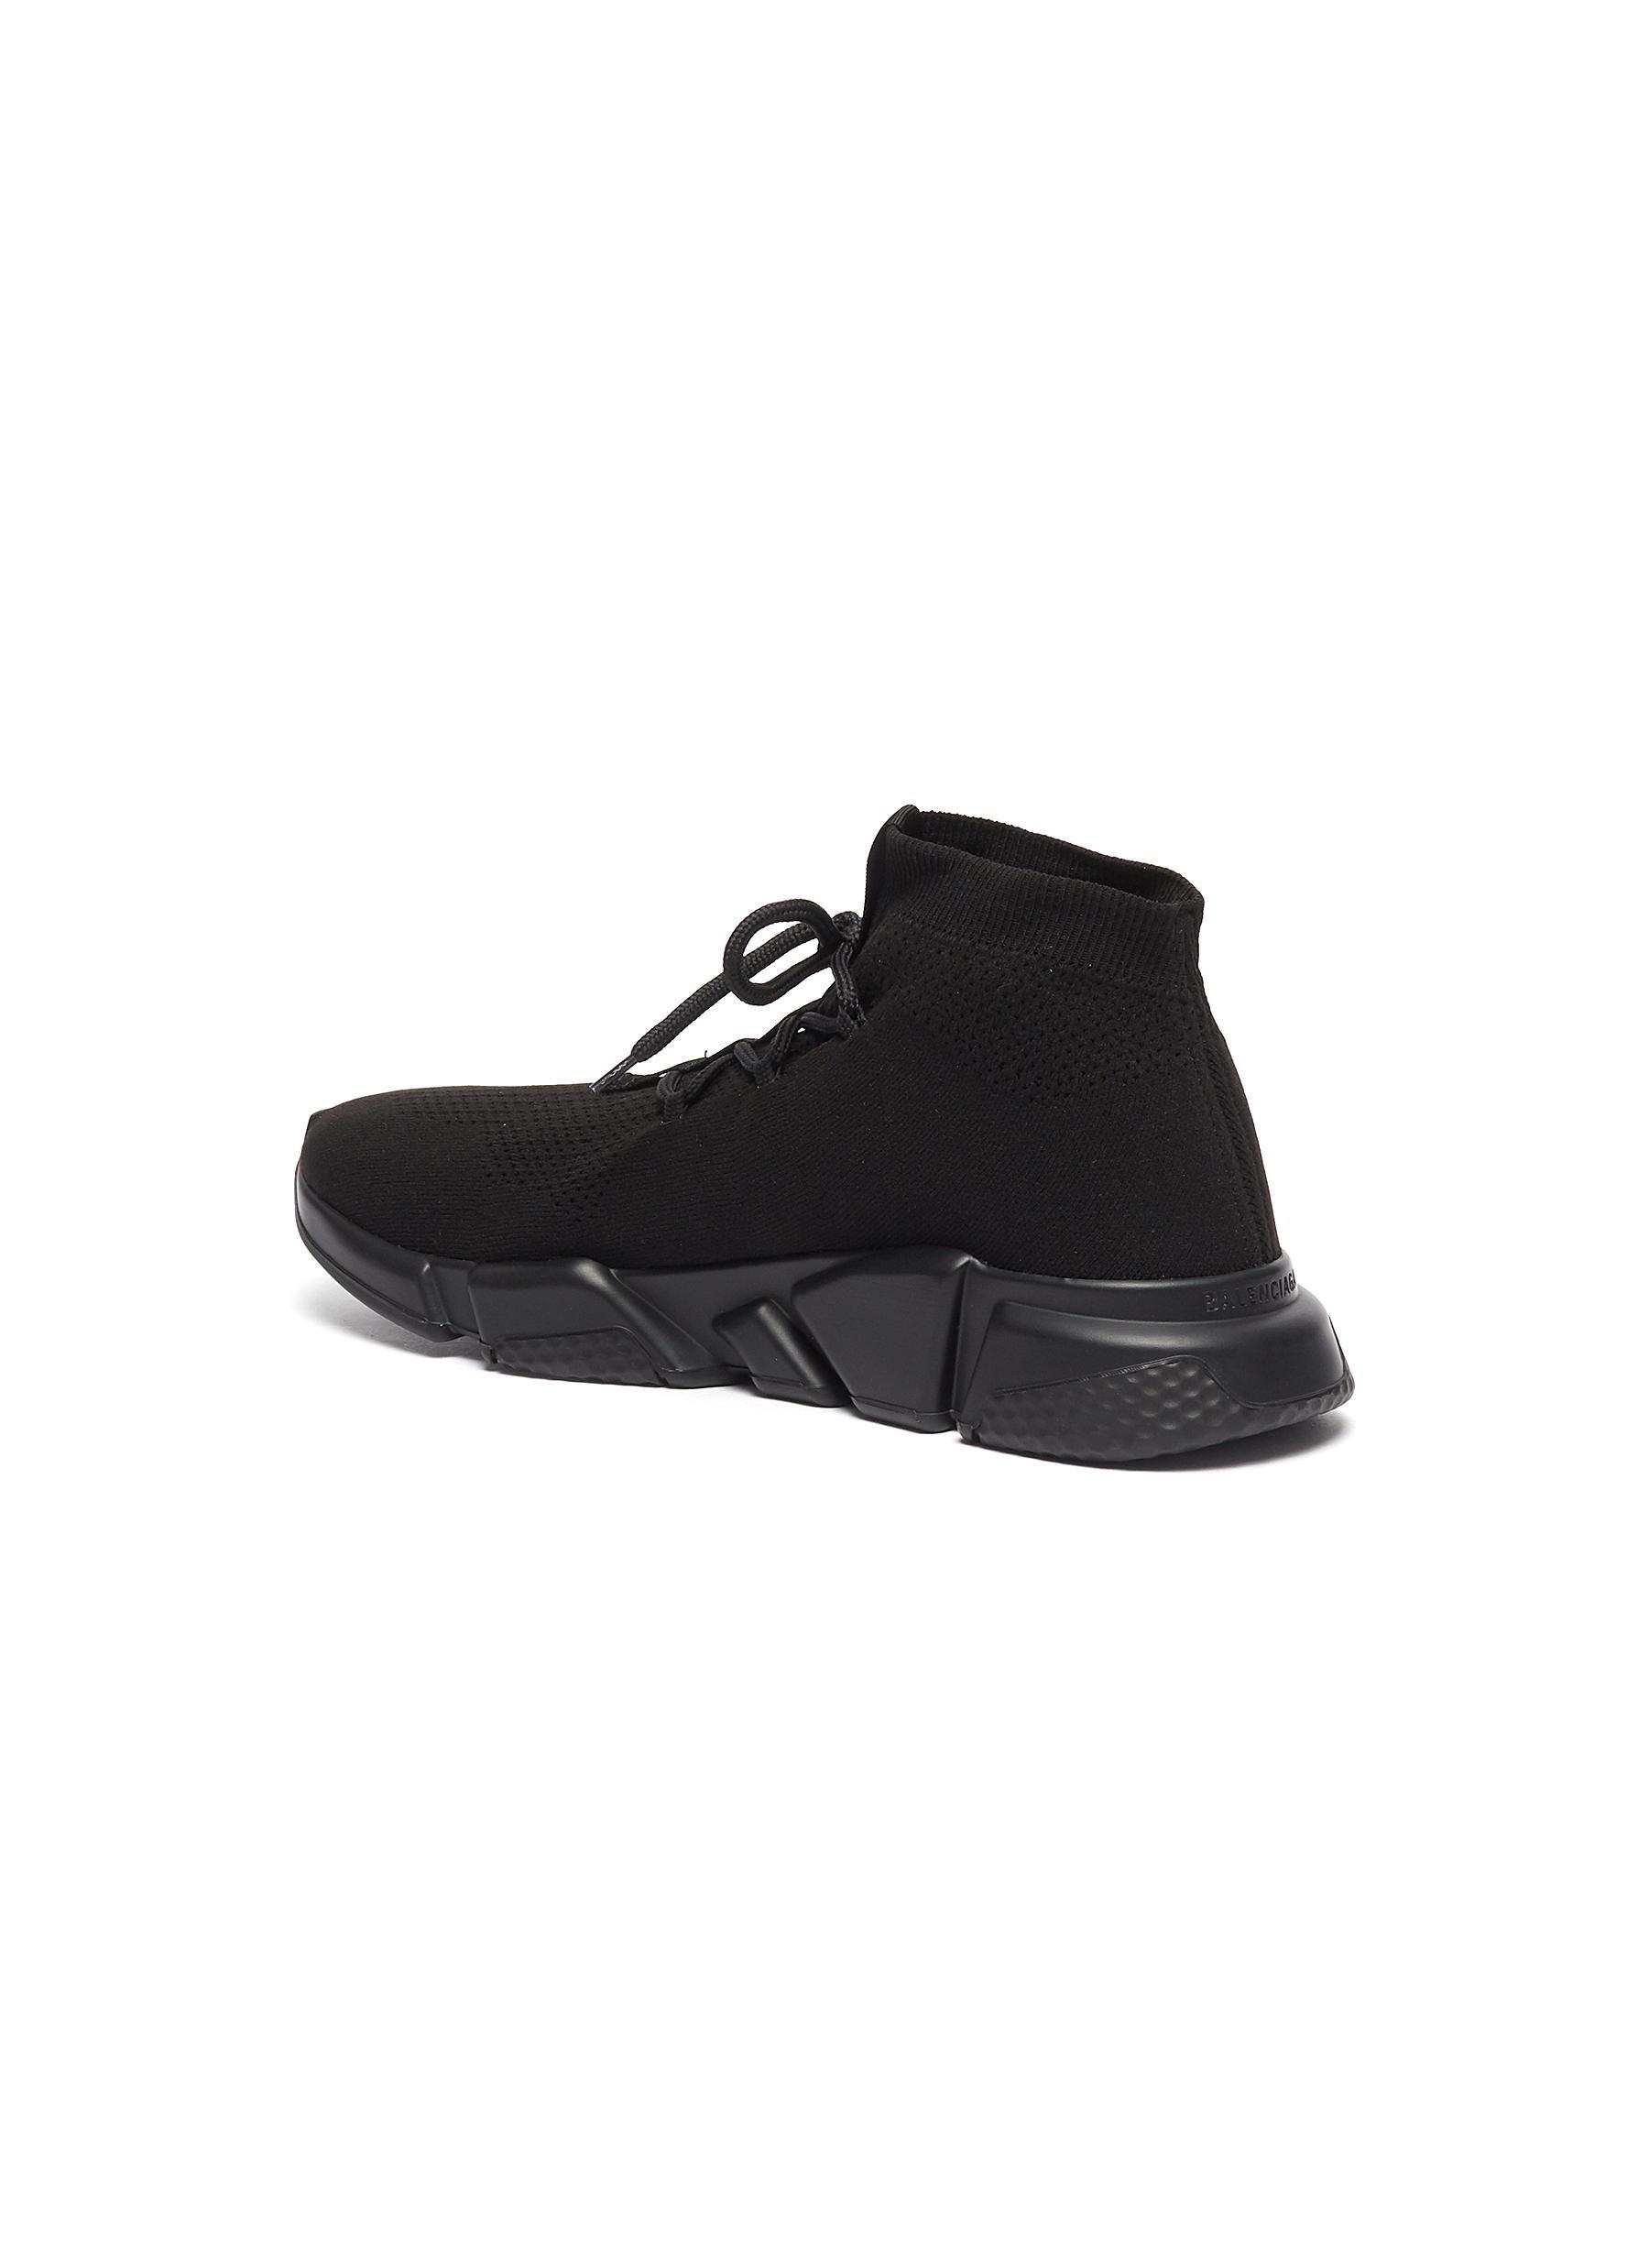 Balenciaga Speed Lace Trainers in Black for Men - Save 38% - Lyst